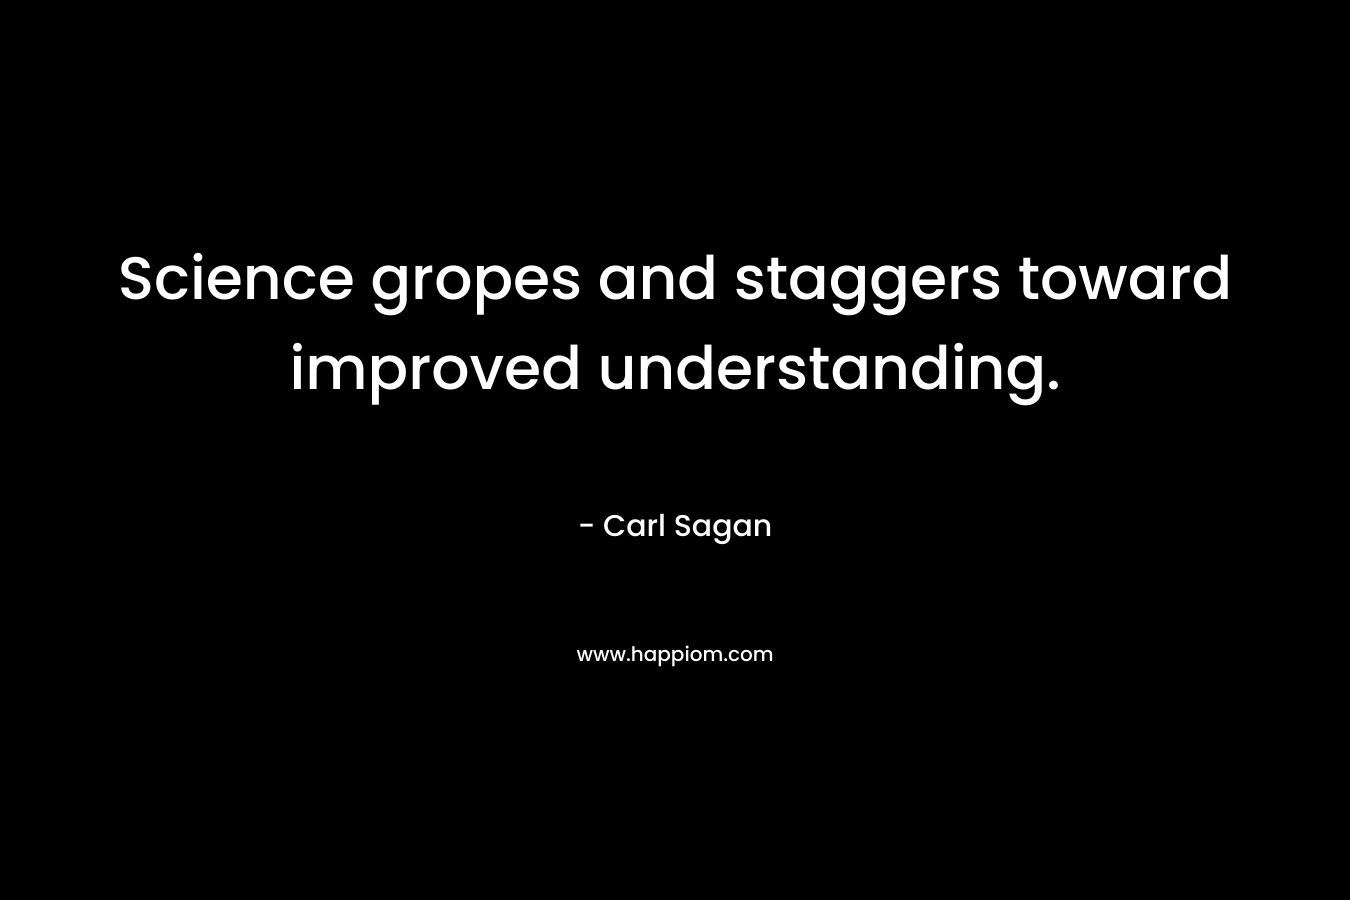 Science gropes and staggers toward improved understanding. – Carl Sagan